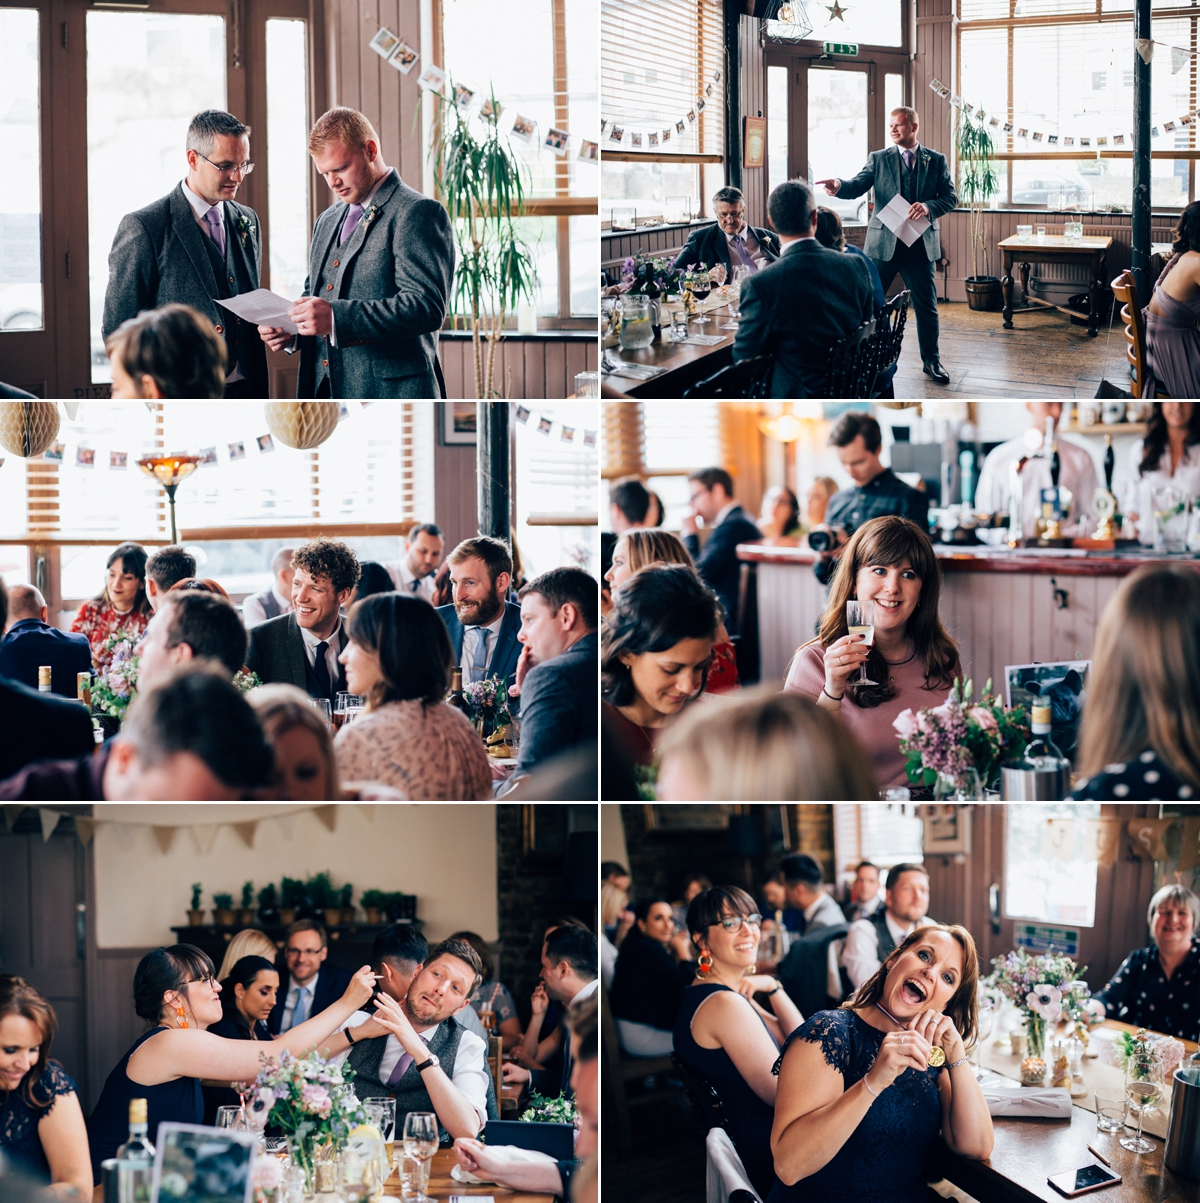 51 A Grace Loves Lace gown for a woodland inspired London pub wedding. Images by Nikki van der Molen